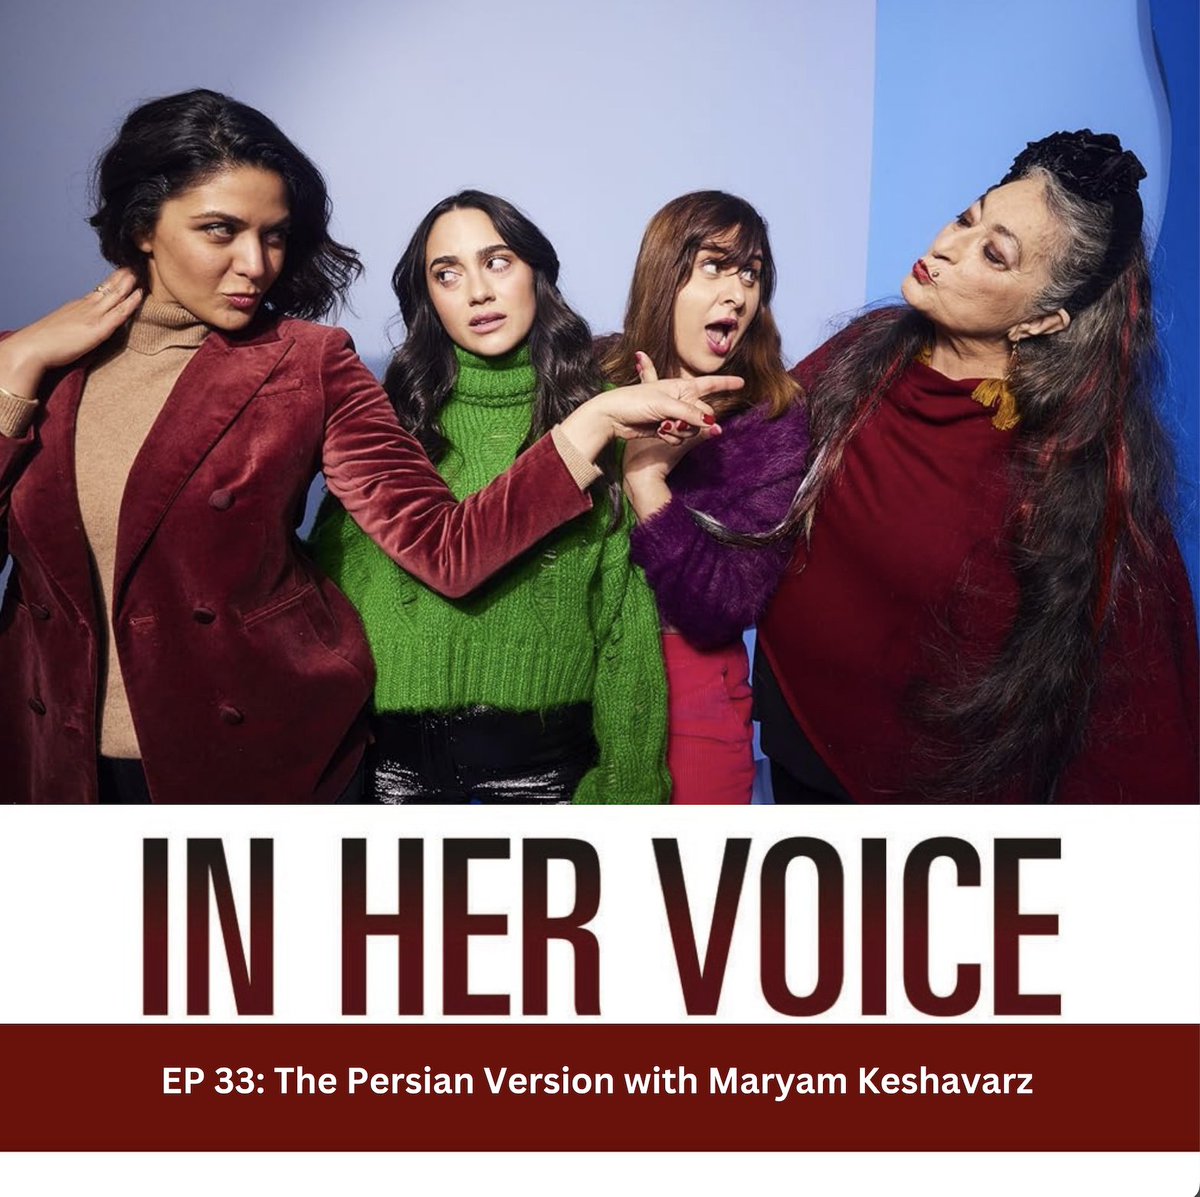 This week on In Her Voice Podcast, EP 33, we are thrilled to welcome @marakeshfilms, an Iranian-American filmmaker, as we discuss her latest film, THE PERSIAN VERSION. Listen to our full conversation: ow.ly/4mc250Q1L1S